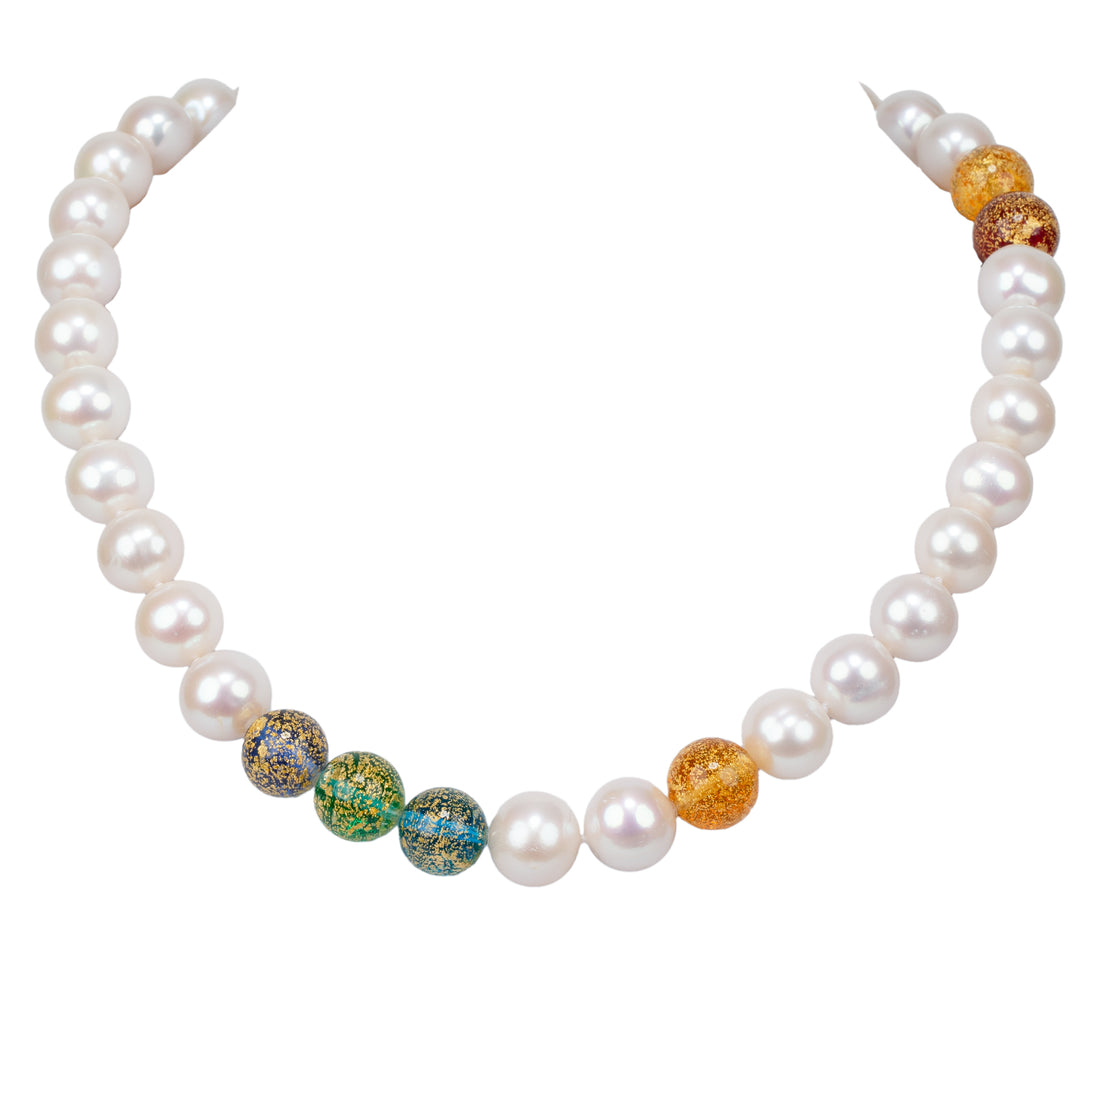 12-13mm Fresh Water Pearl & Murano Bead Necklace